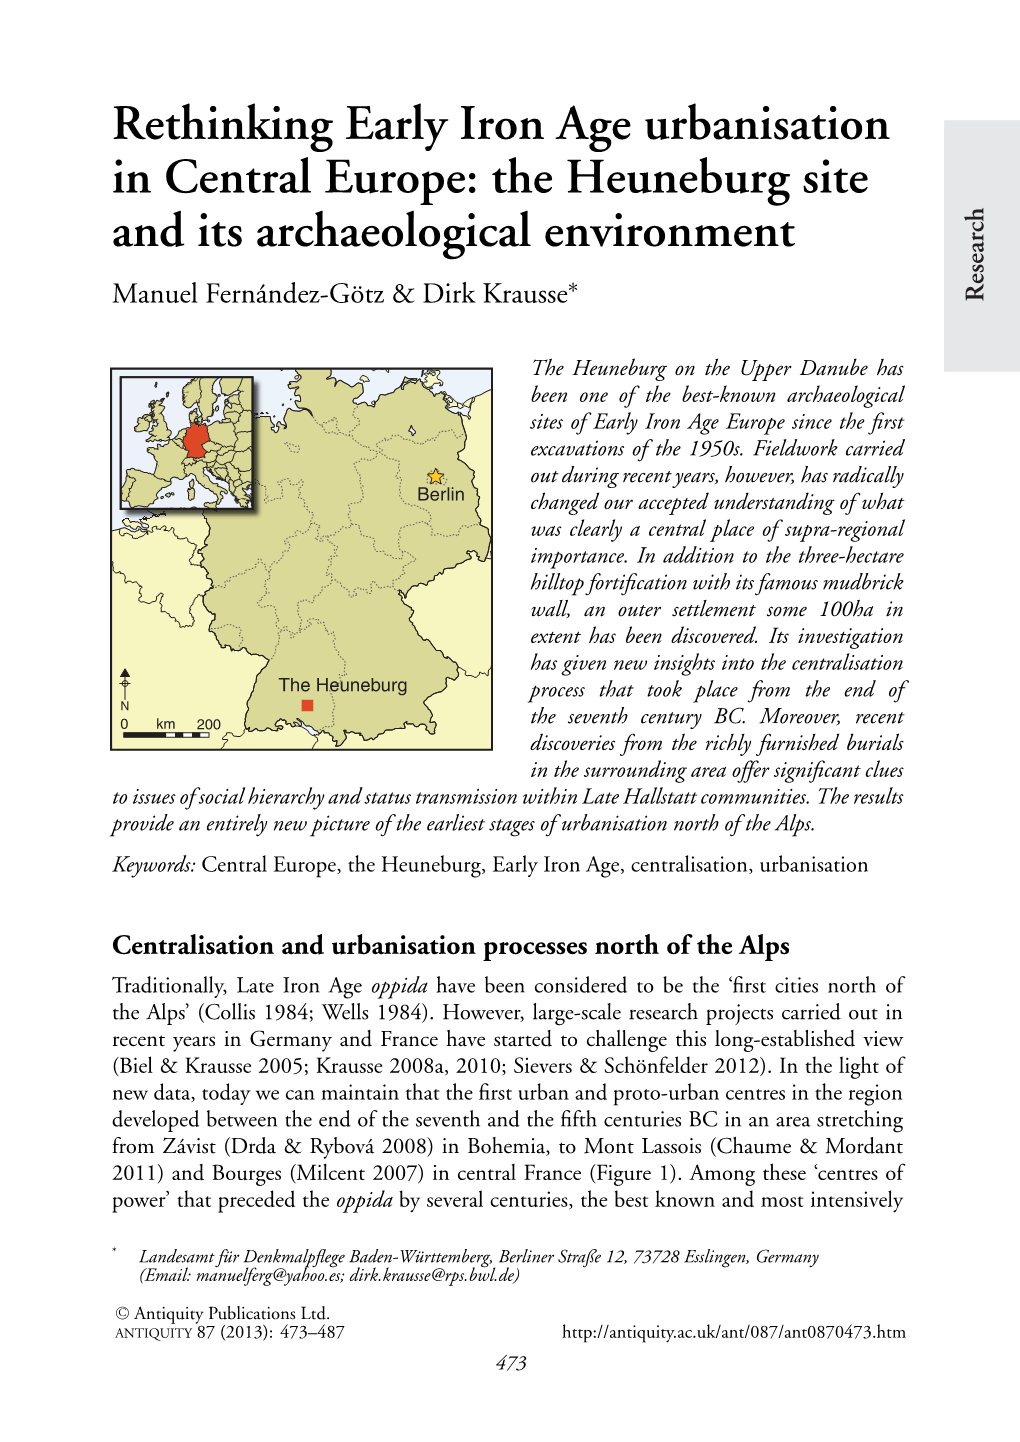 Rethinking Early Iron Age Urbanisation in Central Europe: The